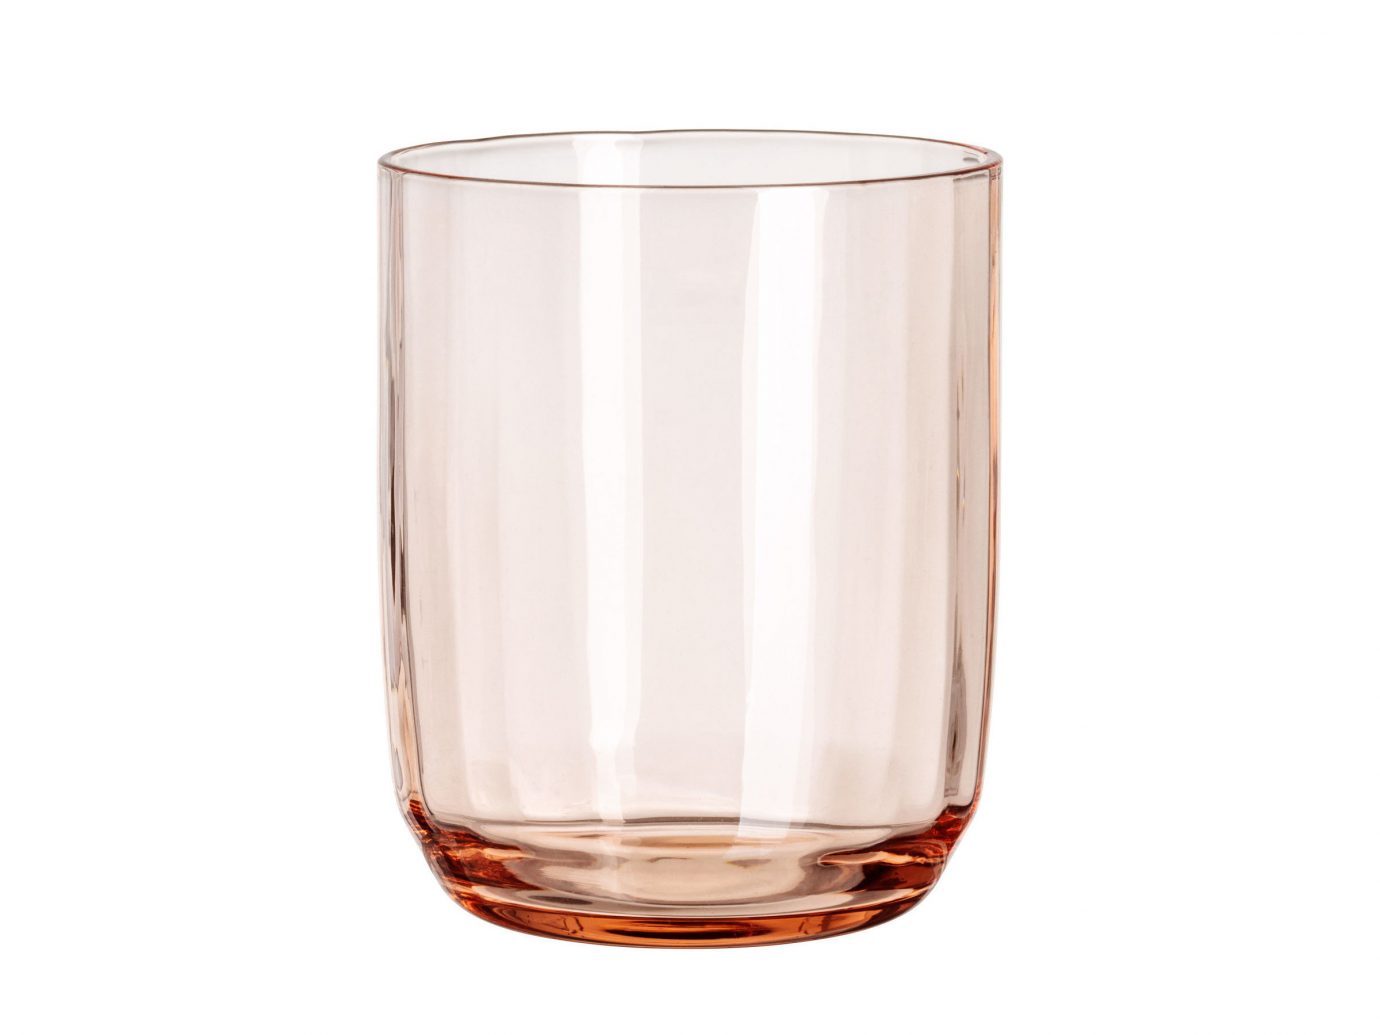 Style + Design Travel Shop cup container glass table highball glass indoor gauge device old fashioned glass beer glass pint glass drinkware barware tumbler ice tableware Drink plastic clear empty pitcher